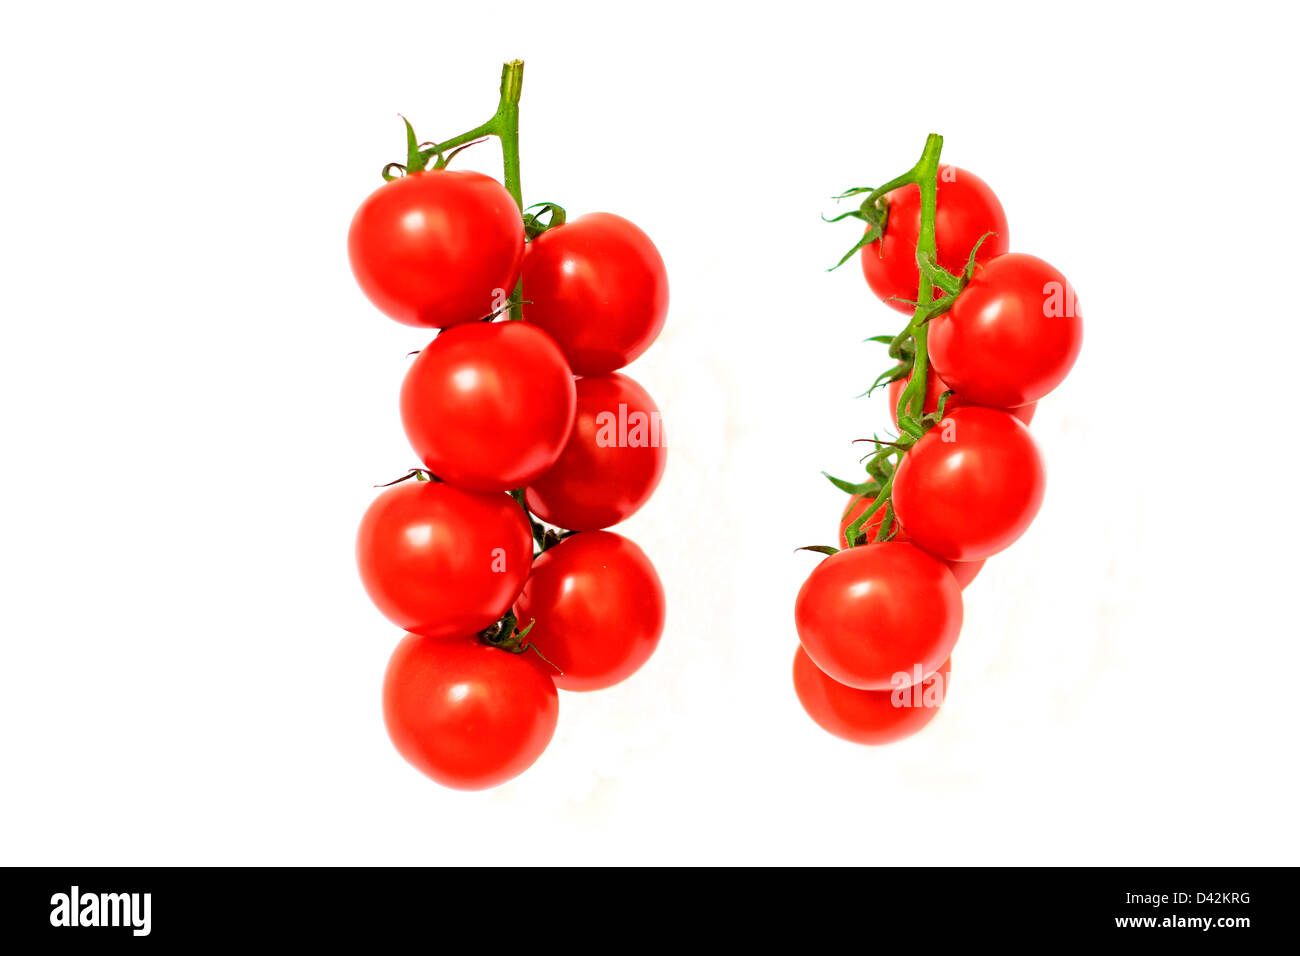 Two tomato vines isolated on white - front and side views Stock Photo